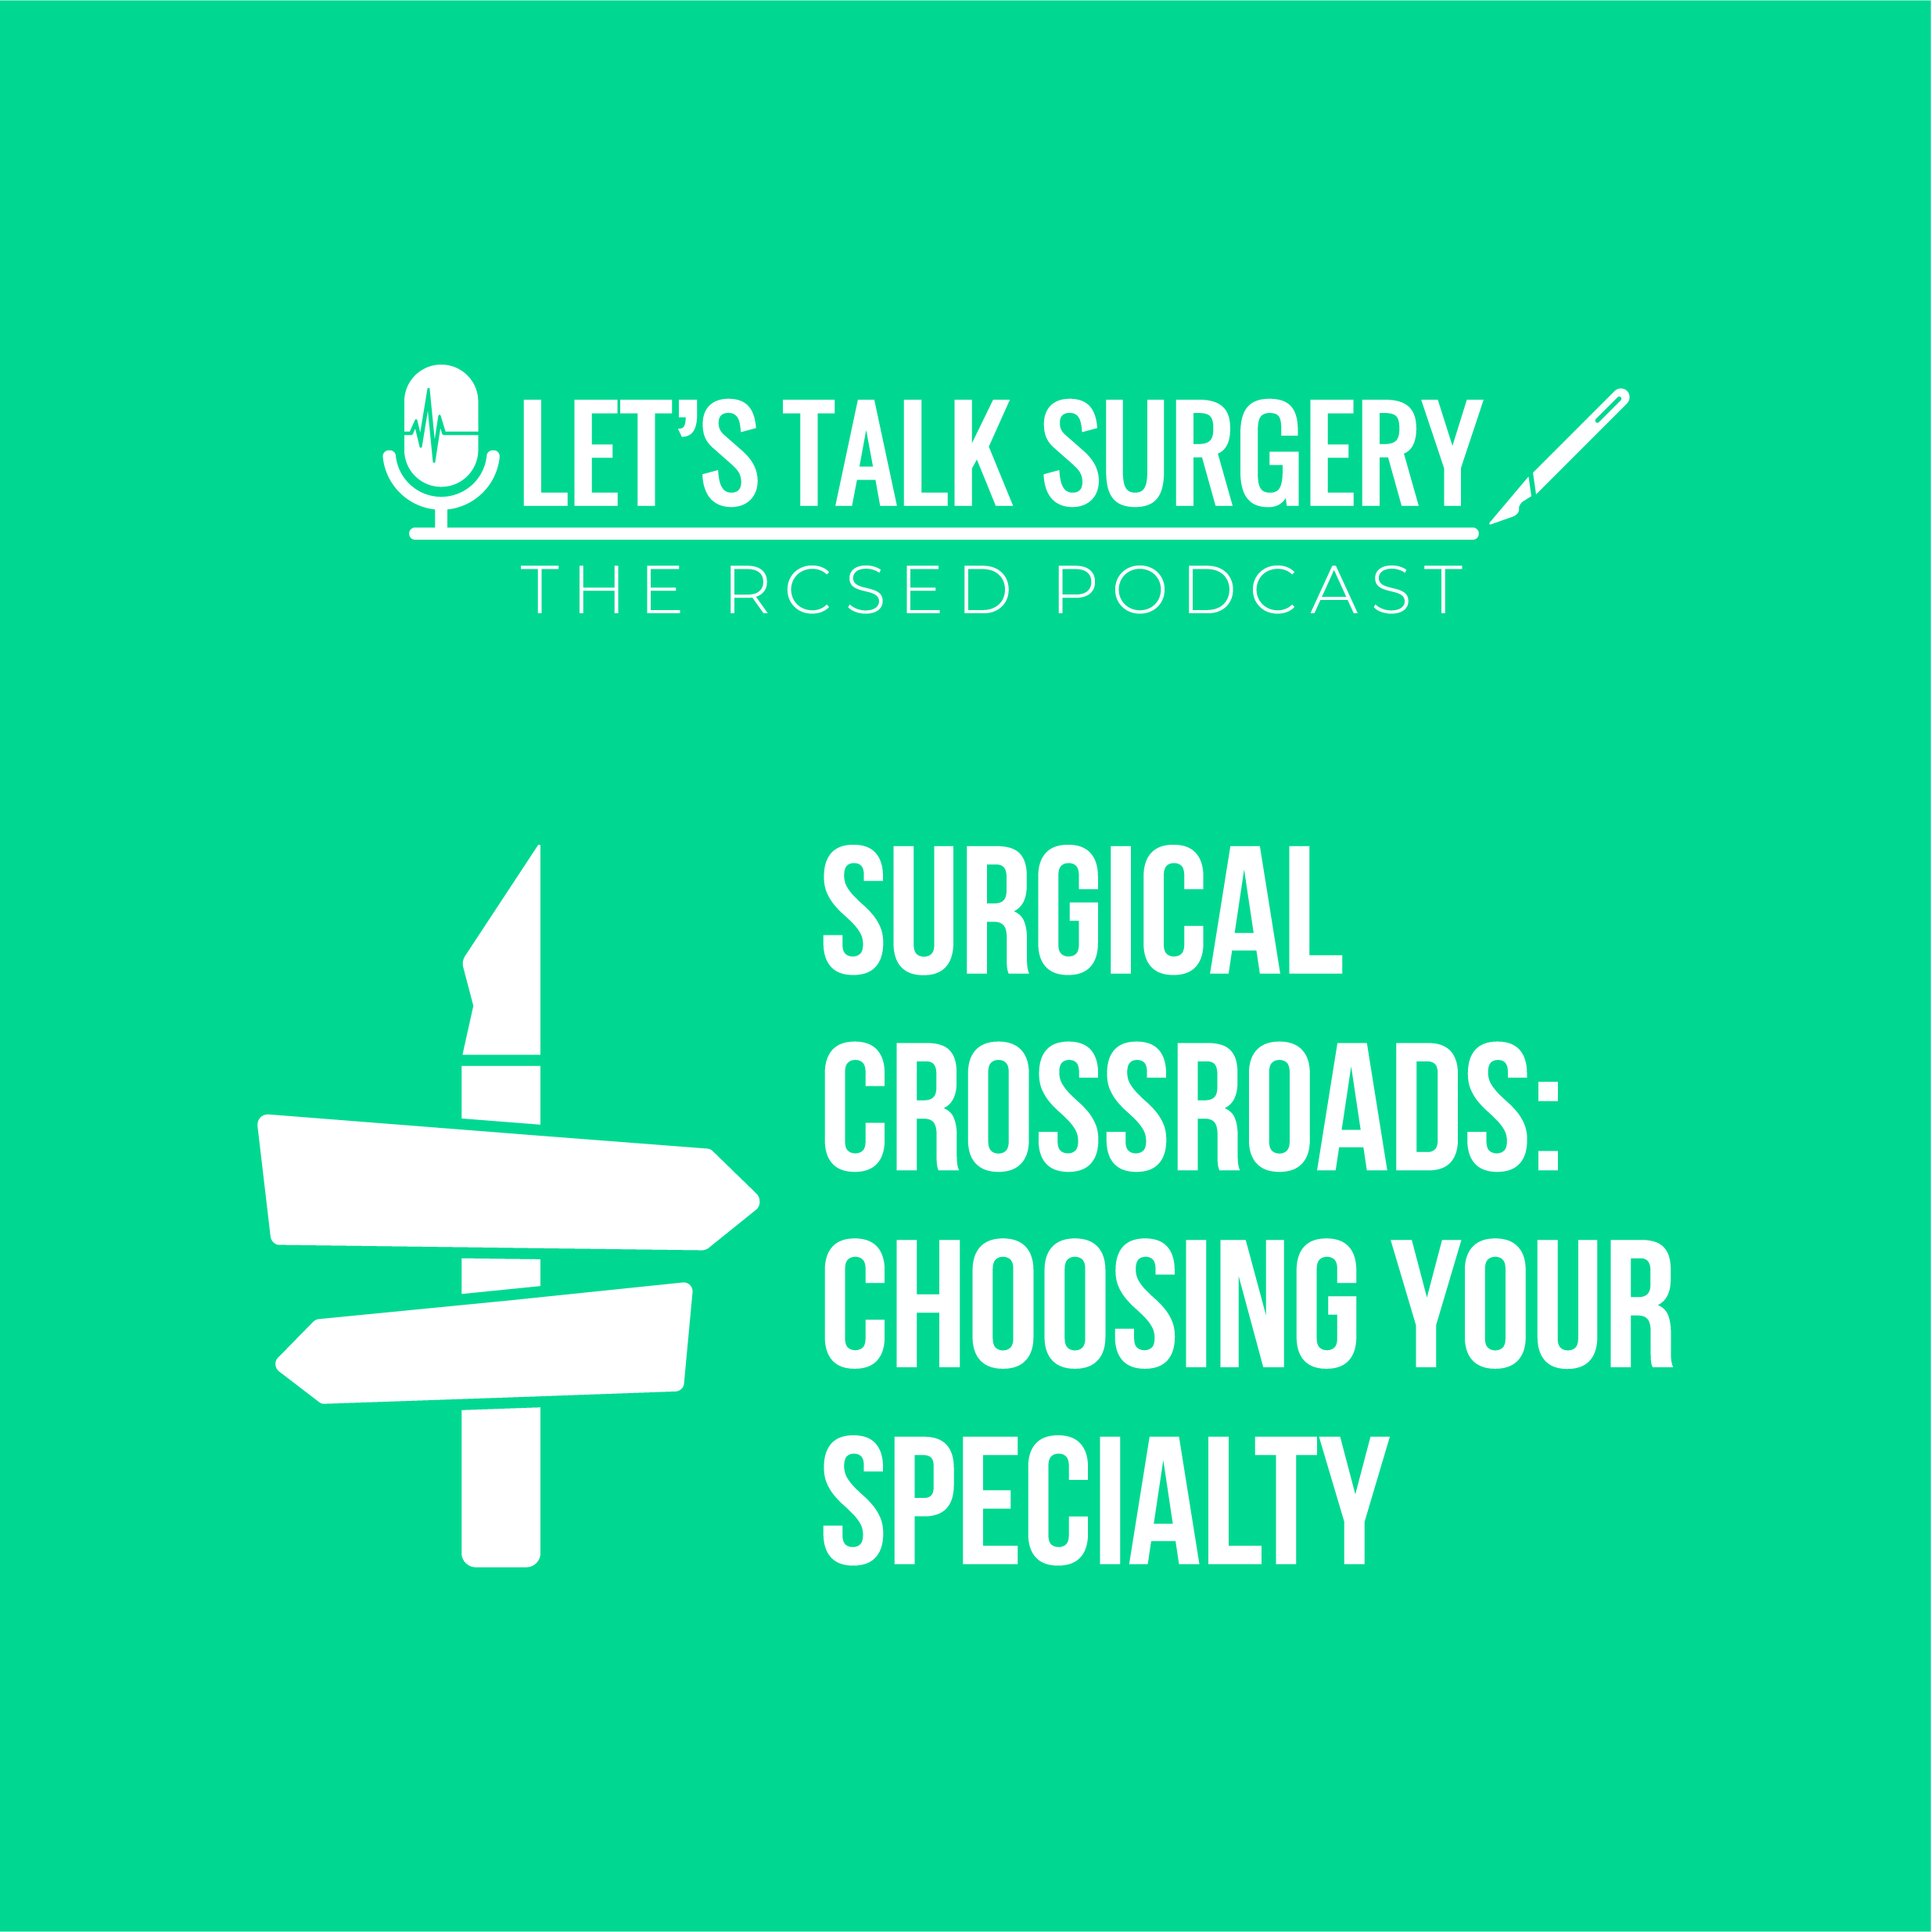 Let's Talk Surgery Podcast, Surgical Crossroads: "Choosing your specialty - the ENT episode"